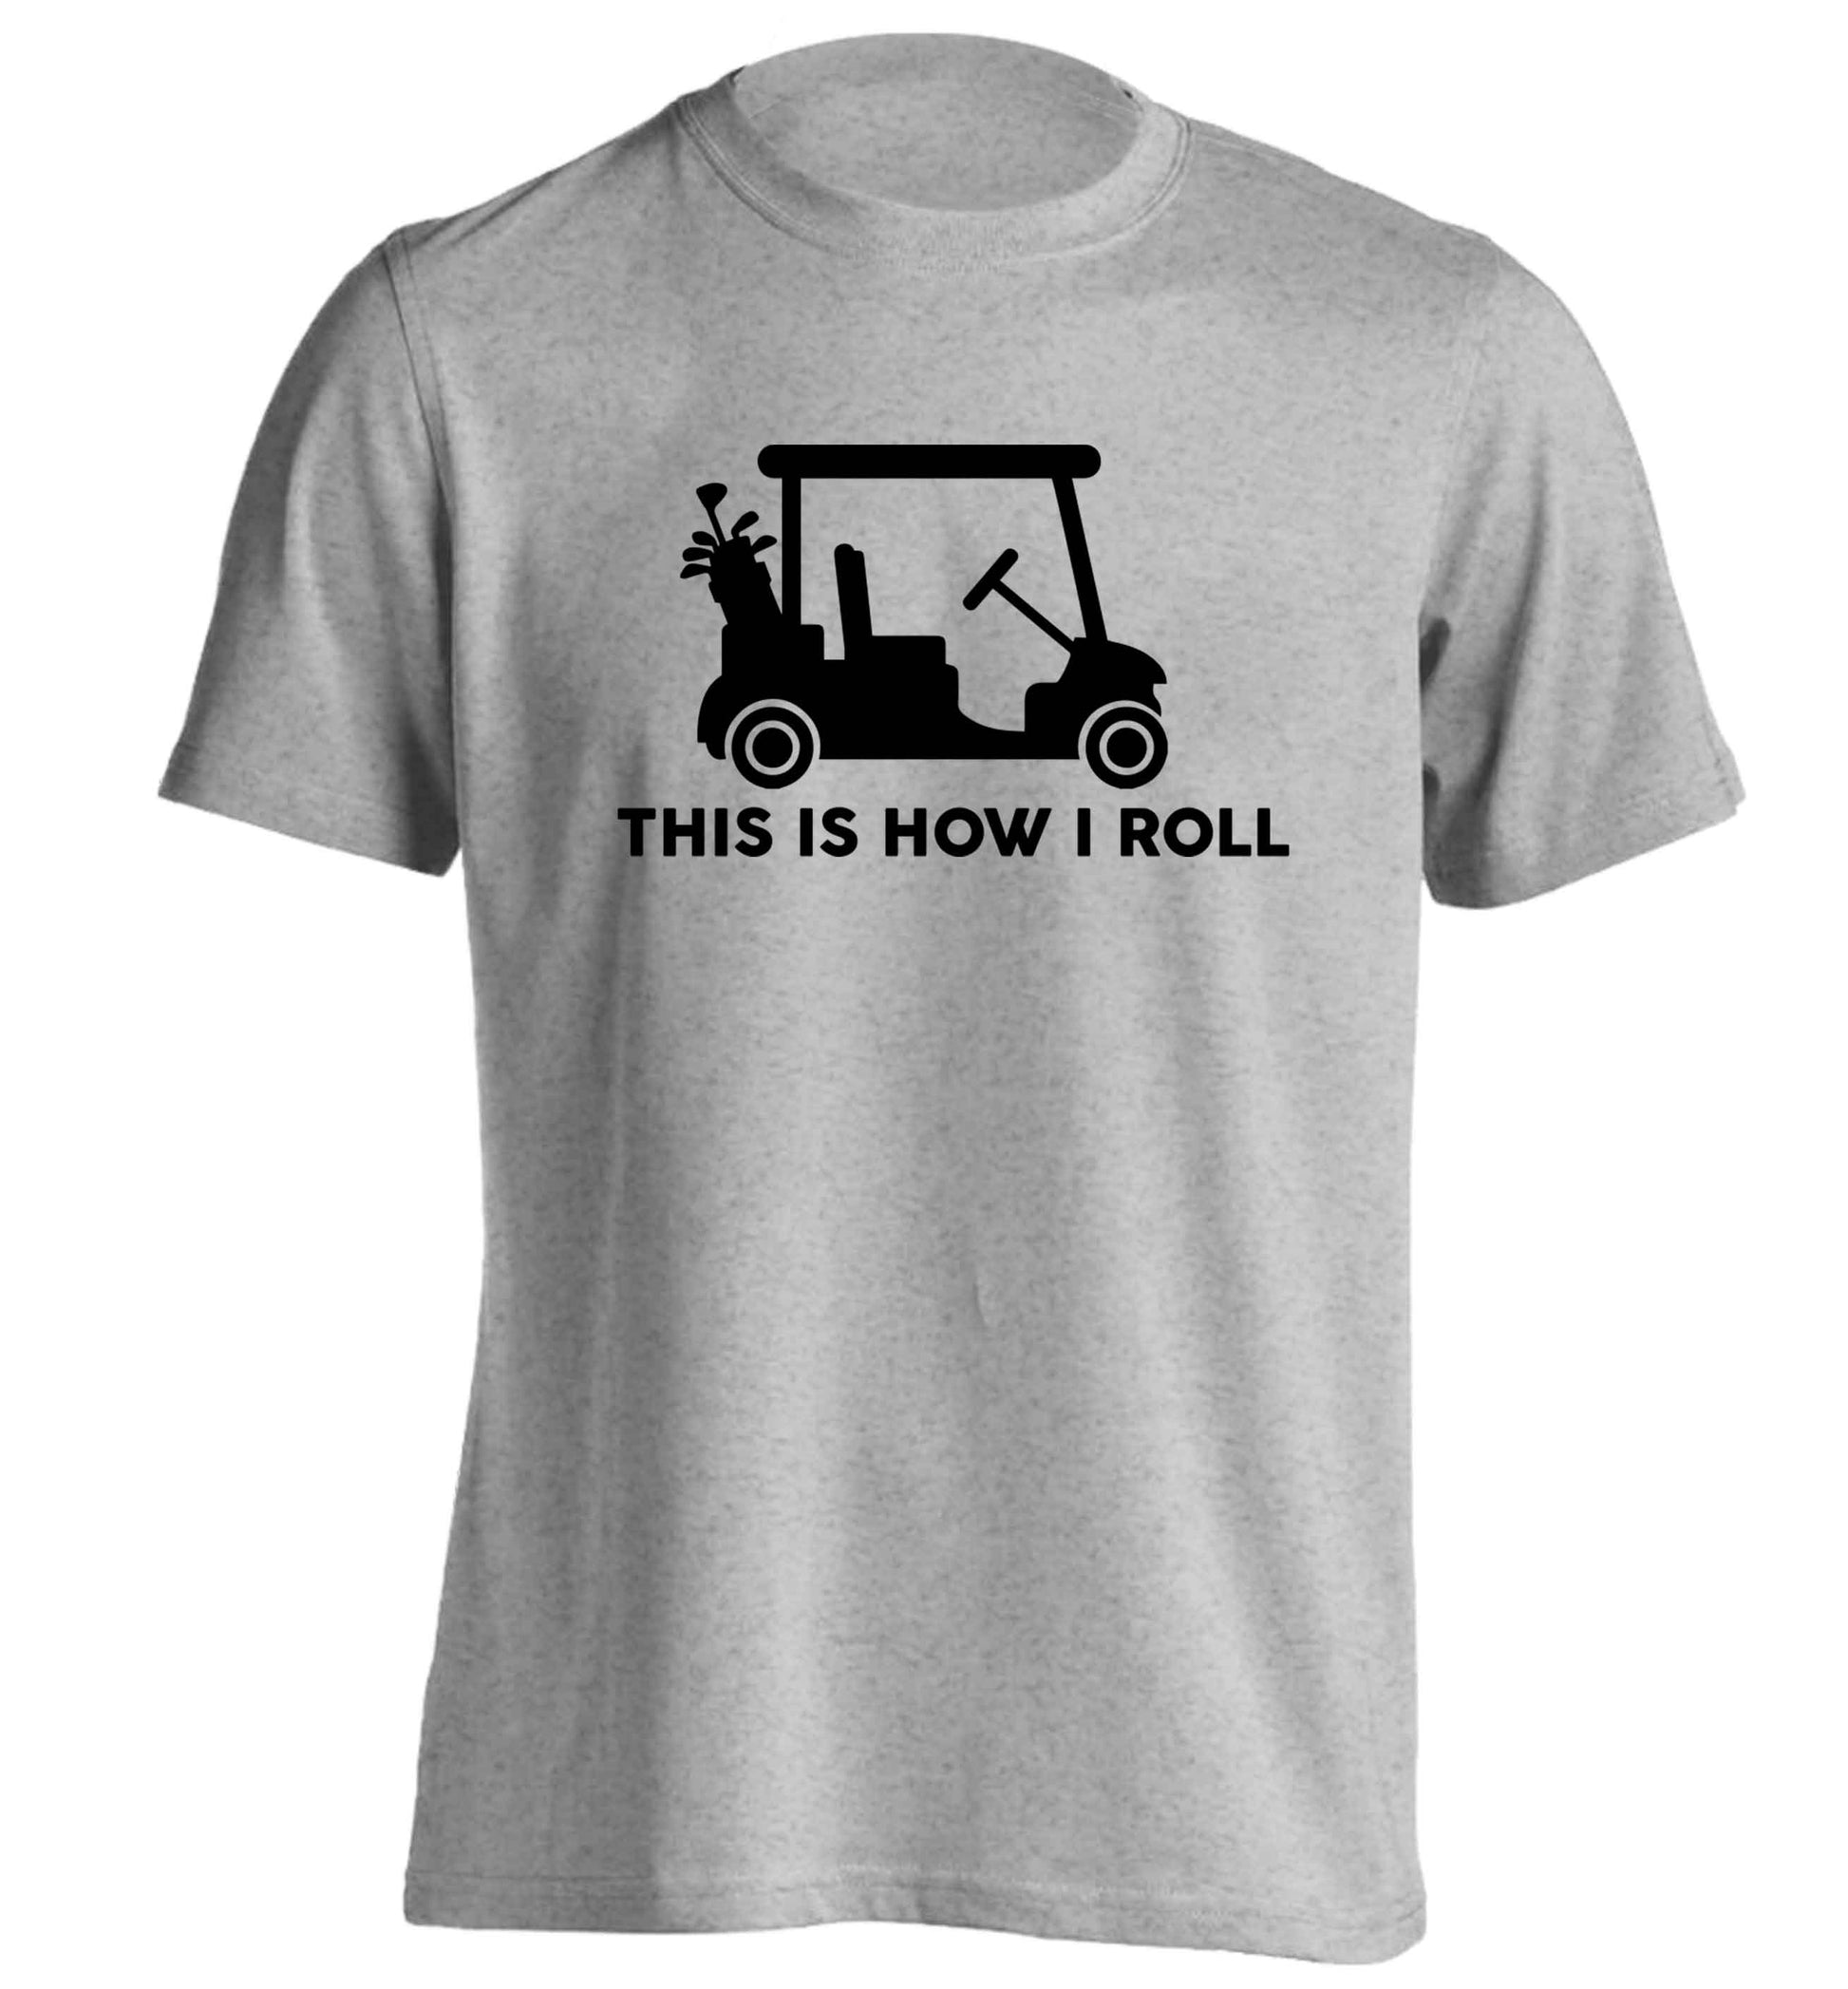 This is how I roll golf cart adults unisex grey Tshirt 2XL